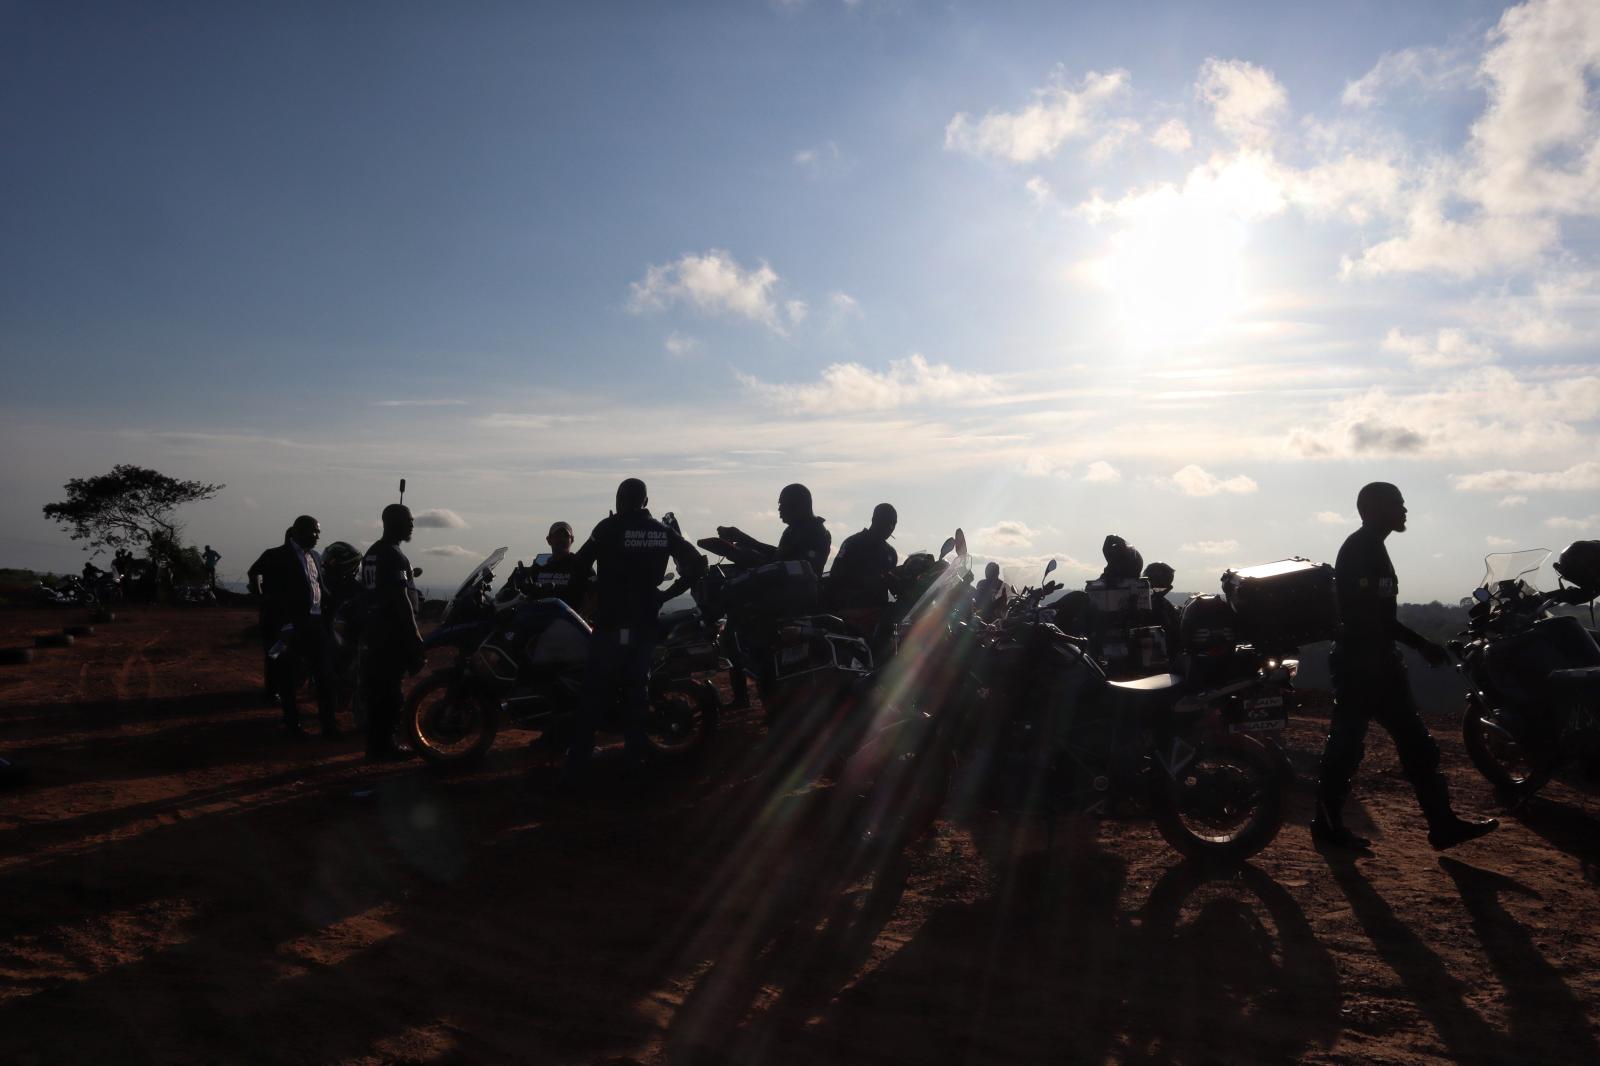 Bikers on Mmaku Hill. | Buy this image